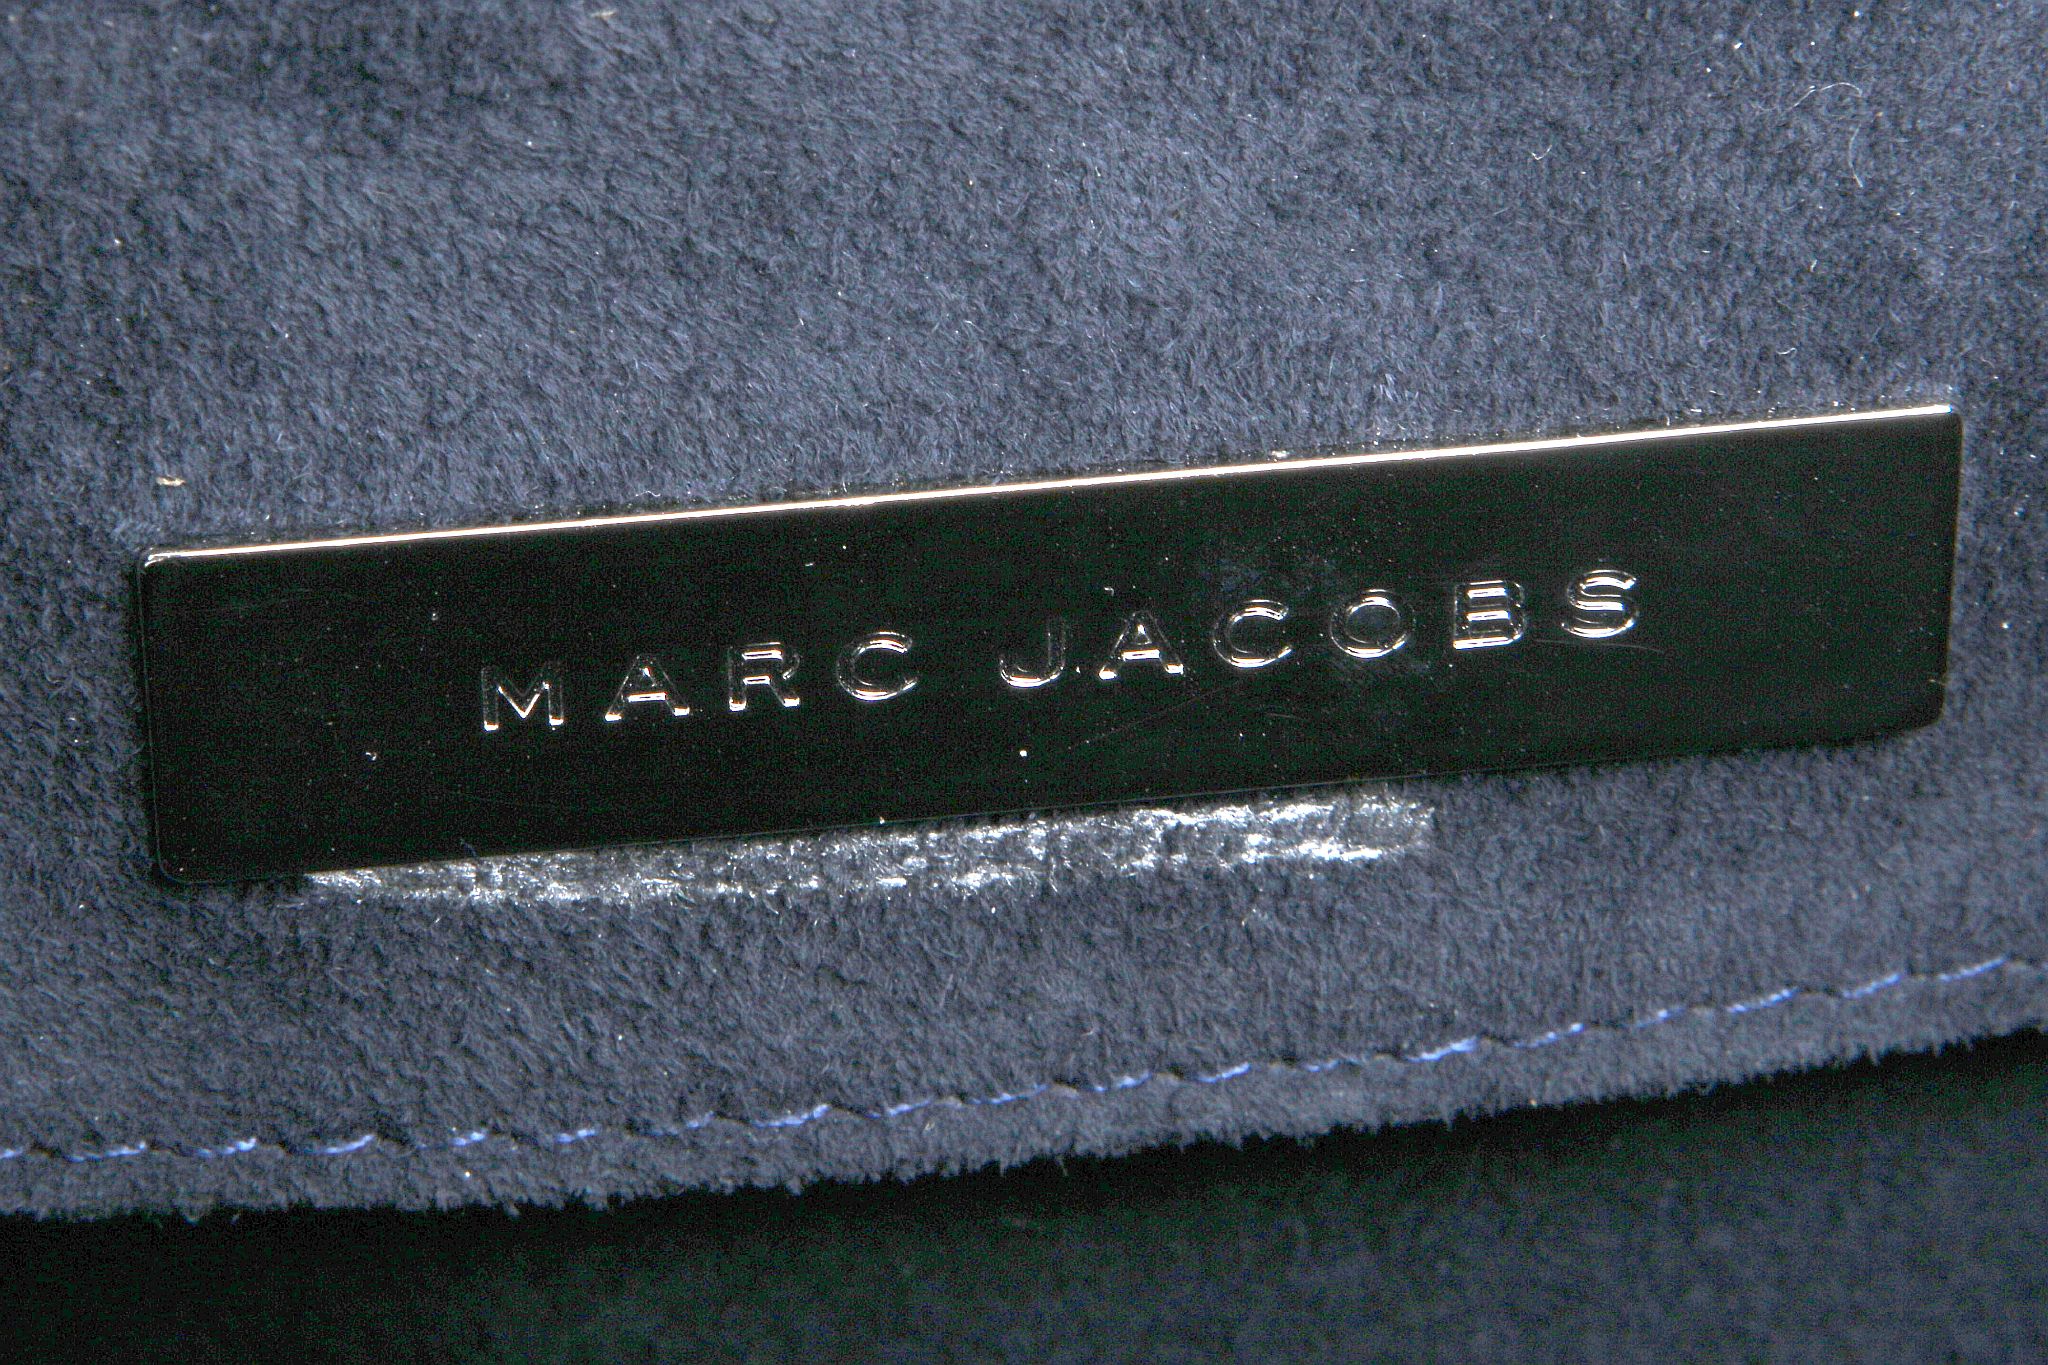 MARC JACOBS VENETIA HANDBAG, teal leather with silver hardware, 38cm wide, 23cm high, with dust bag - Image 9 of 12